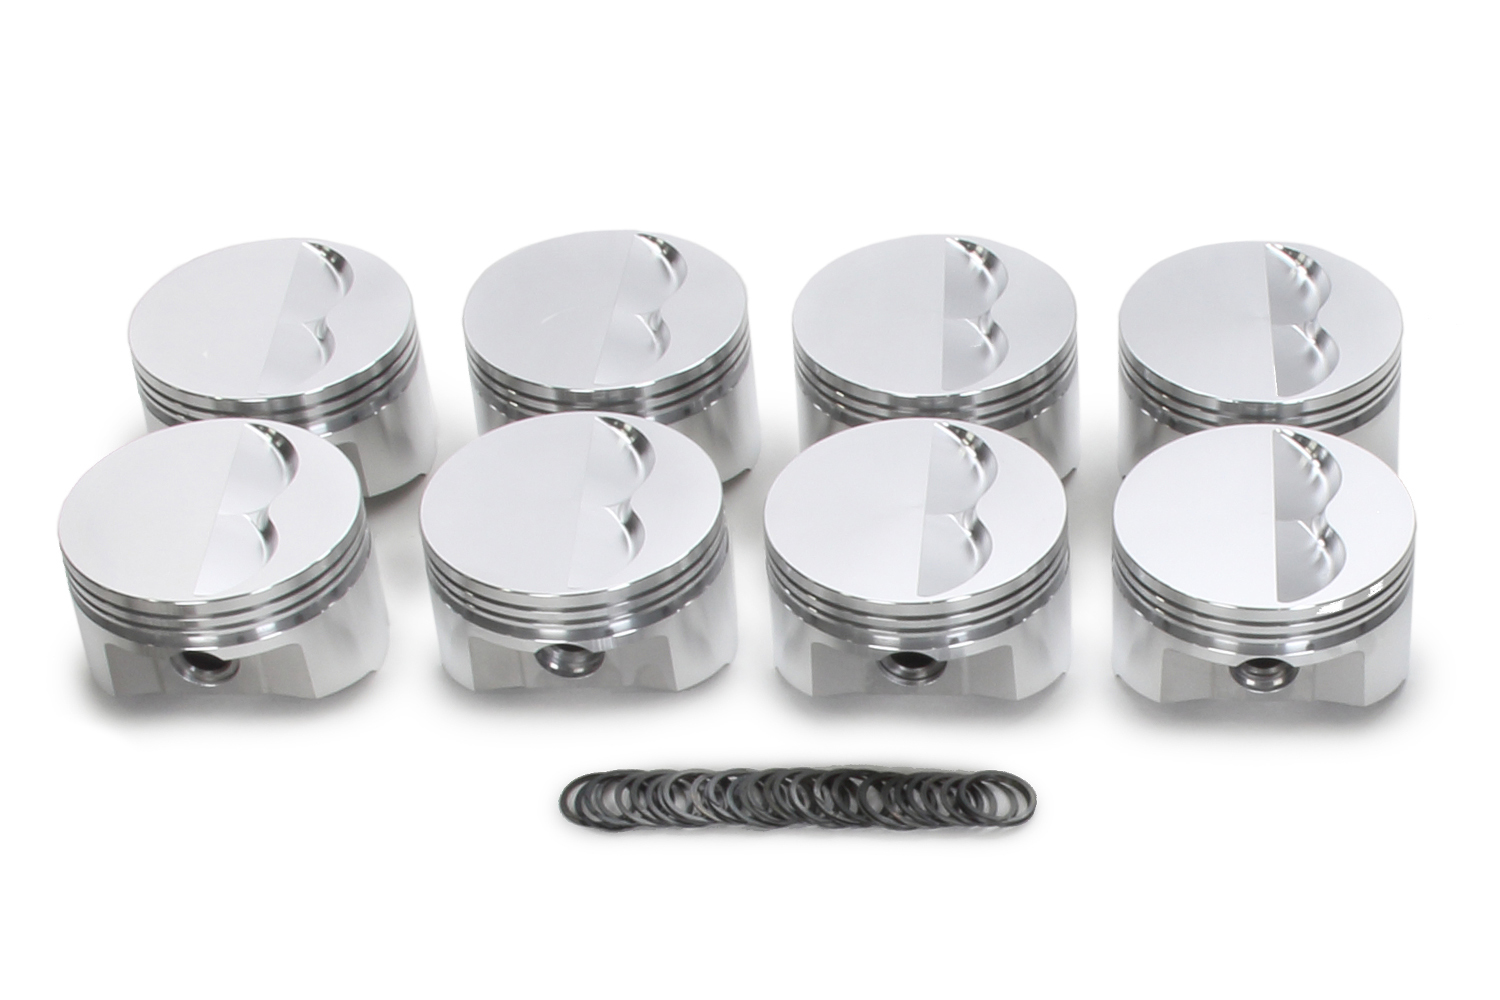 SRP Pistons 138090 Piston, 350 Flat Top, Forged, 4.040 in Bore, 1/16 x 1/16 x 3/16 in Ring Grooves, Minus 5.00 cc, Small Block Chevy, Set of 8